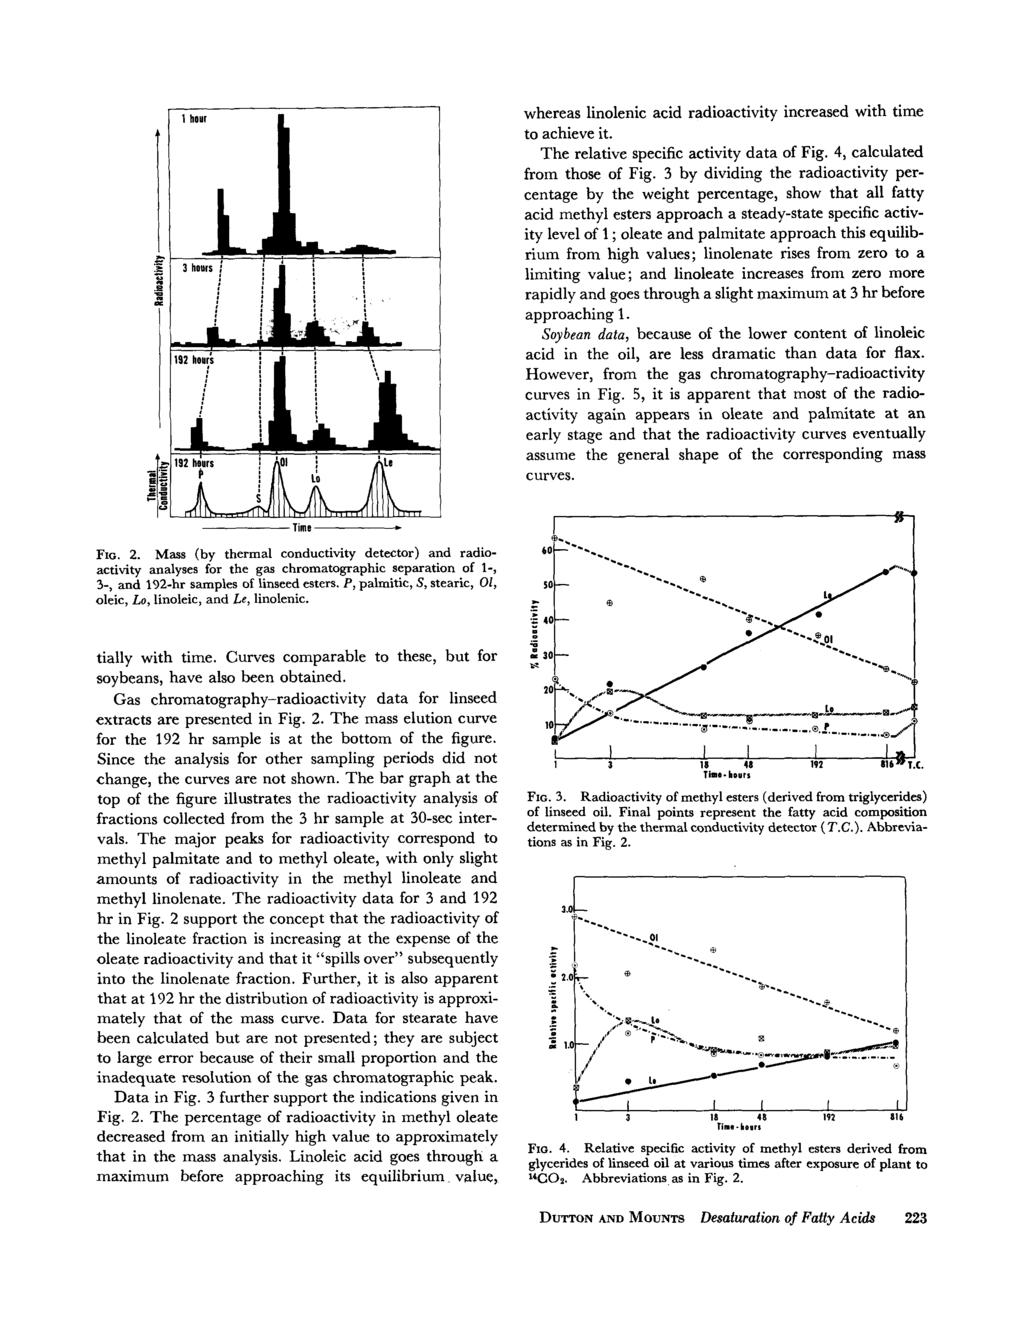 I 1 hour I Time. FIG. 2. Mass (by thermal conductivity detector) and radioactivity analyses for the gas chromatographic separation of 1-, 3-, and 192-hr samples of linseed esters.